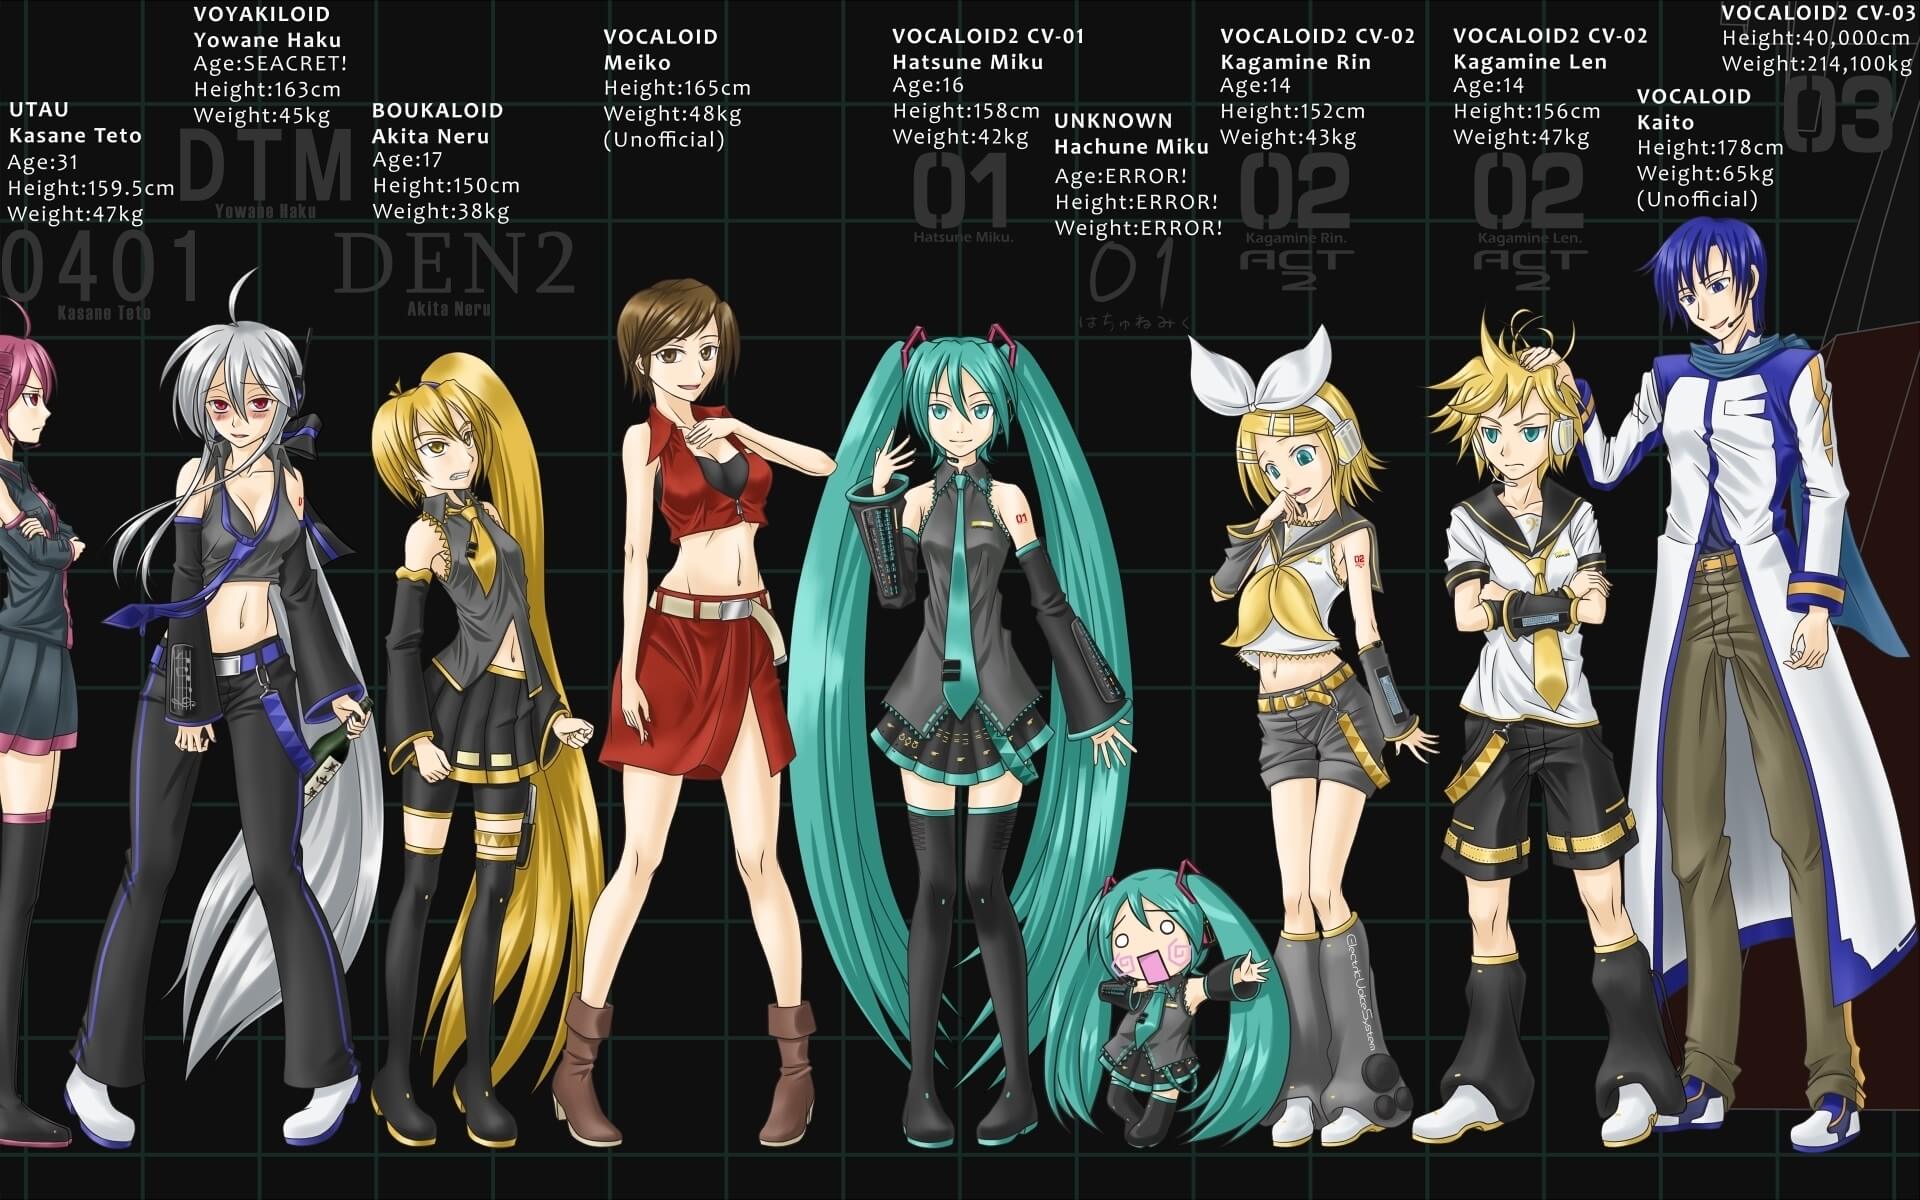 Post image -What is Vocaloid?? | WotakuExchange.com